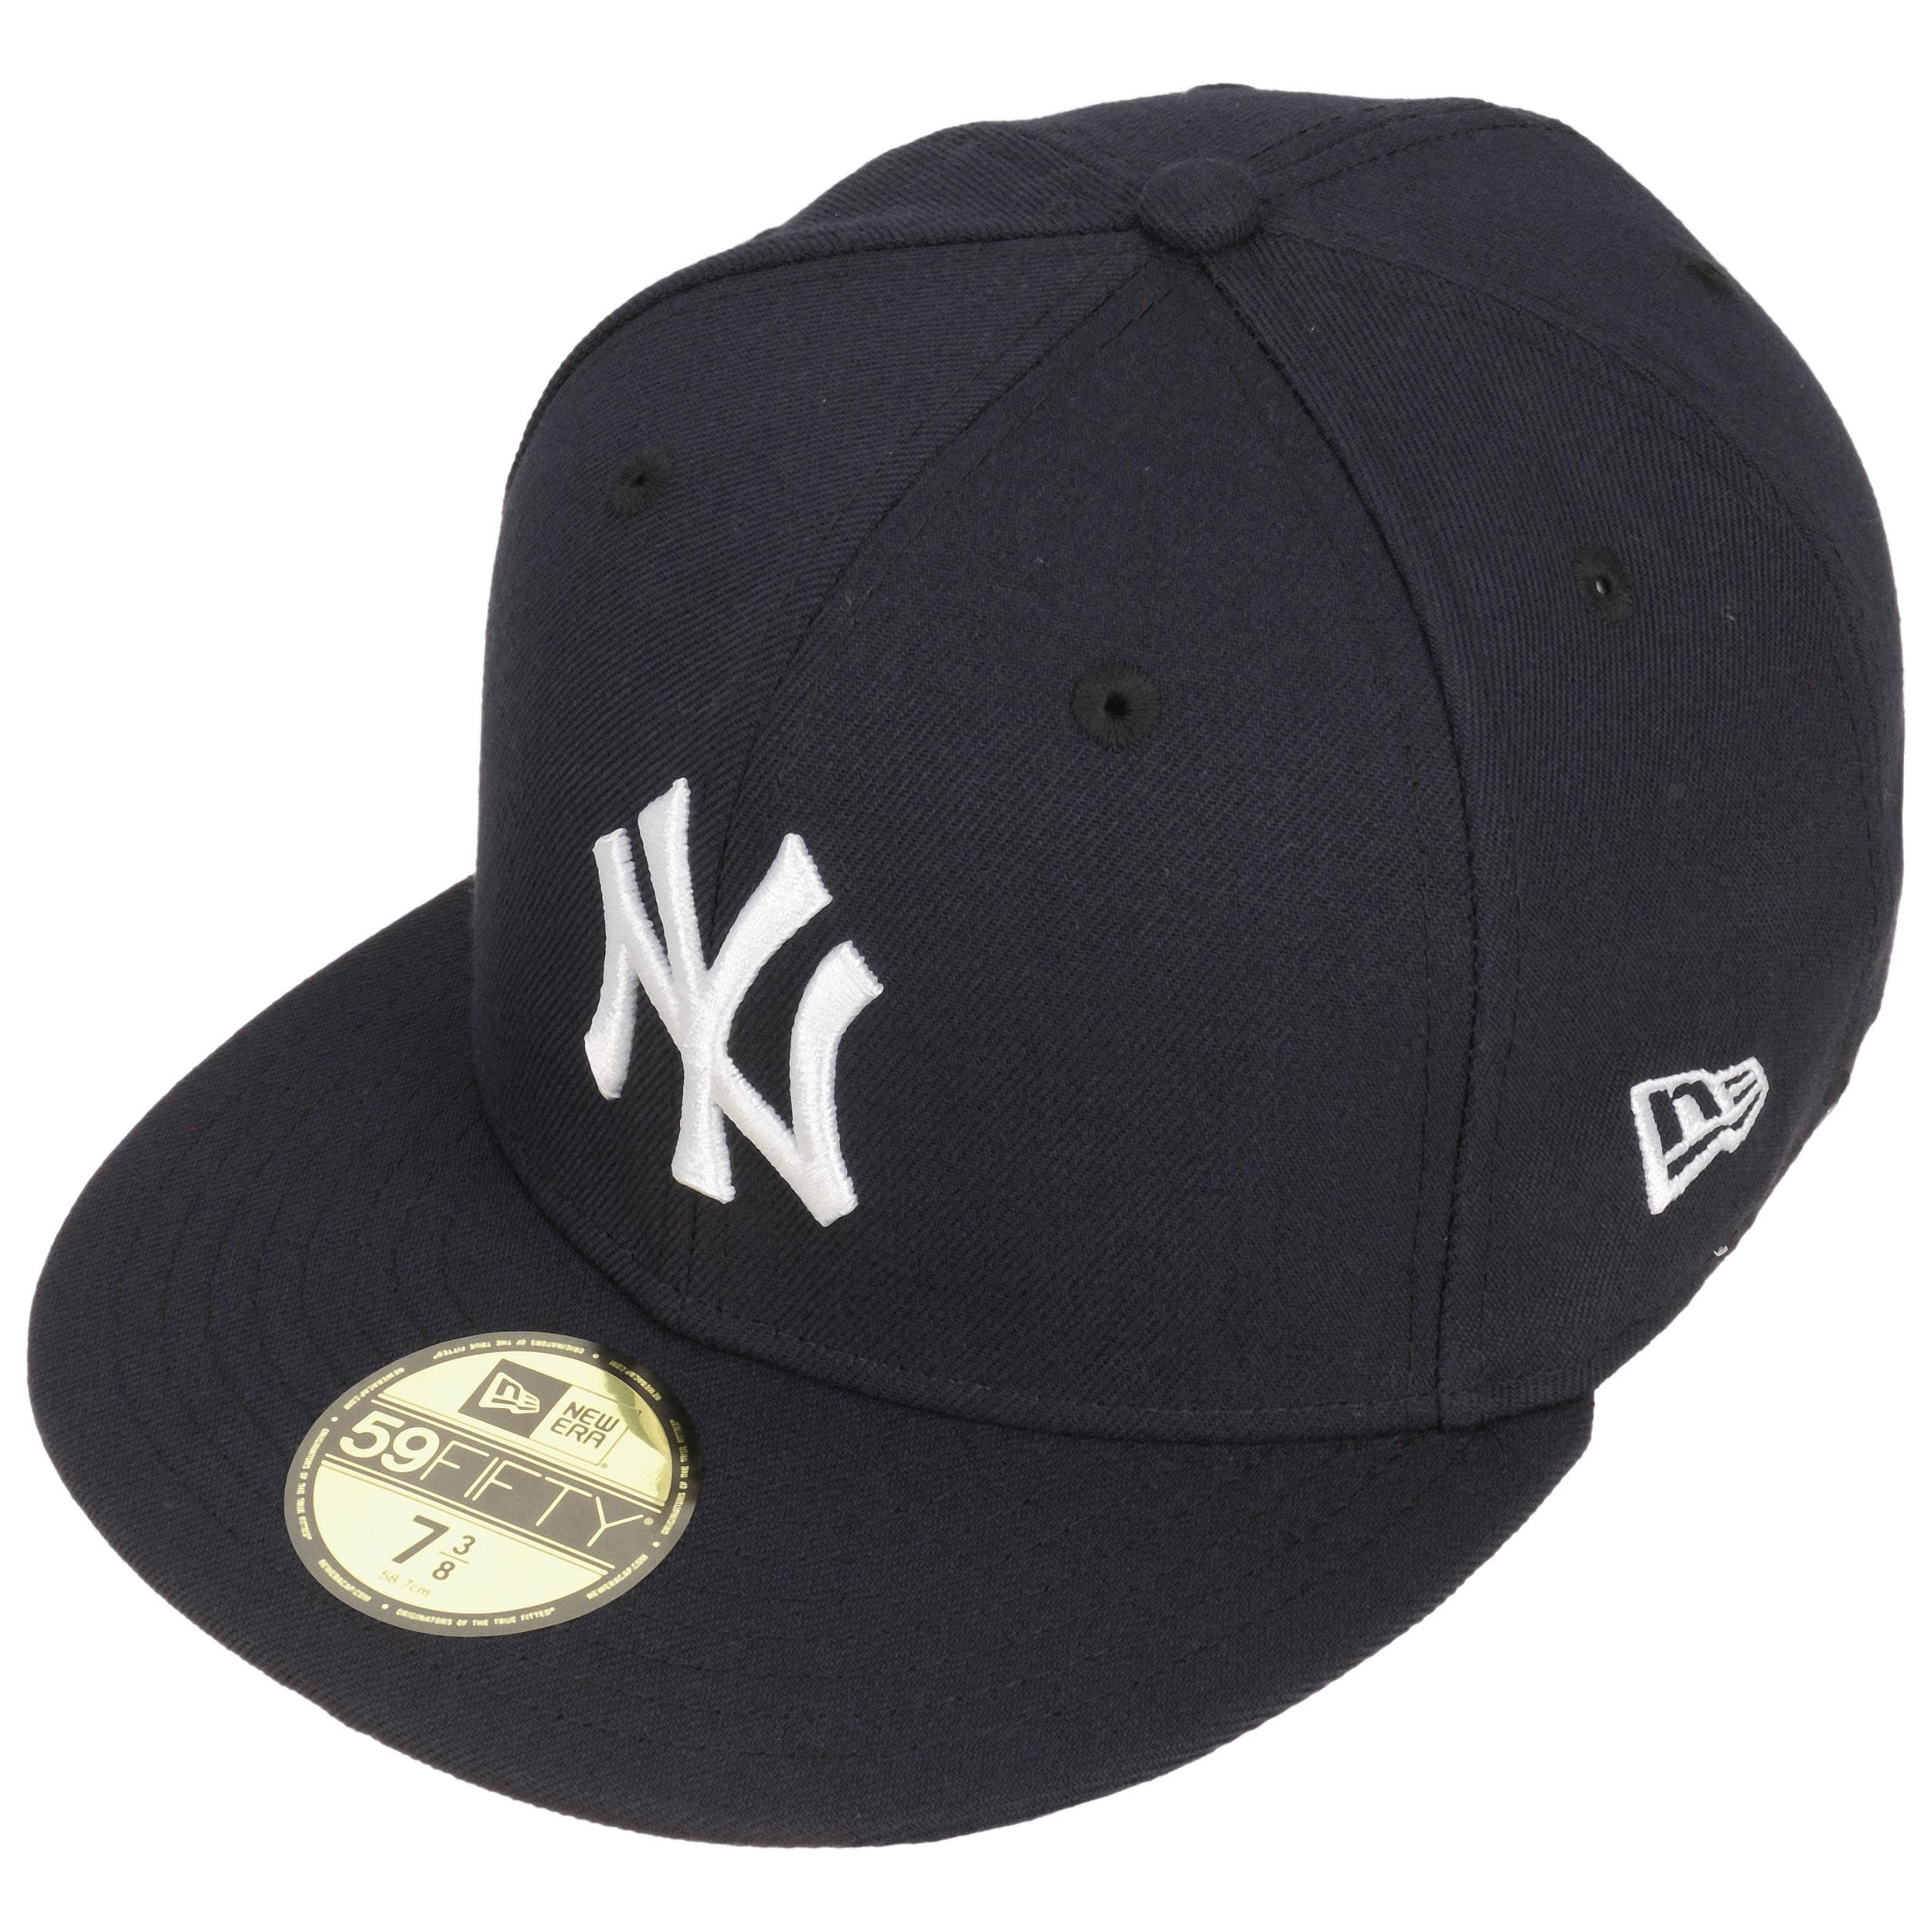 Yankees Pet by New - 39,95 €